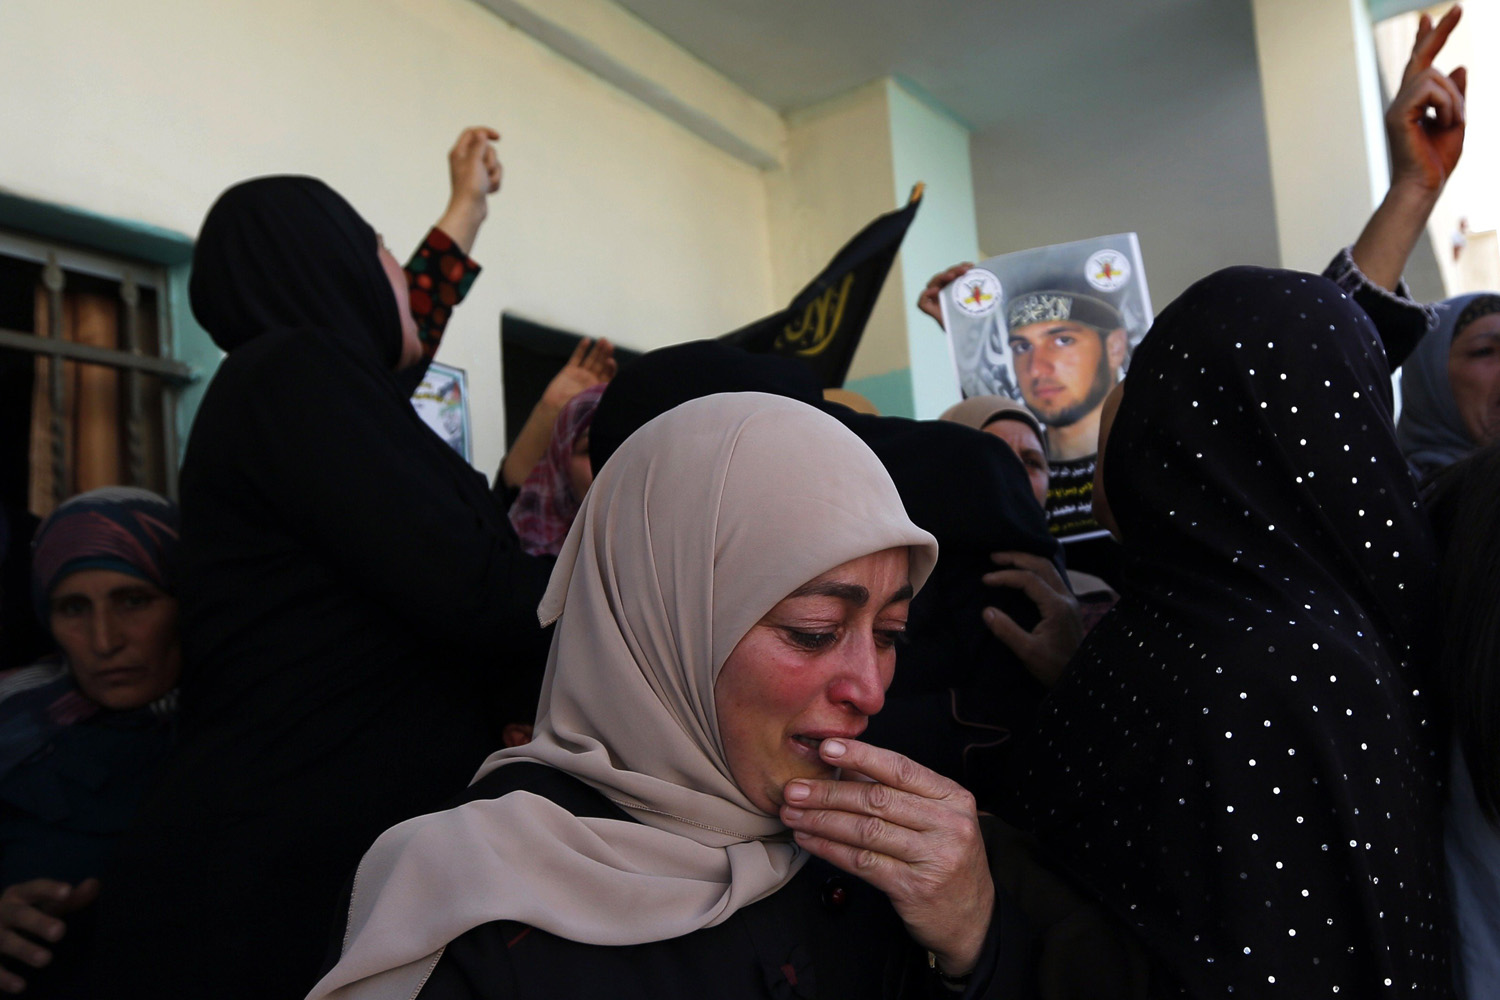 Oct. 23, 2013. A Palestinian woman mourns during the funeral of Mohammed Assi in the West Bank village of Beit Liqiya, near Ramallah.